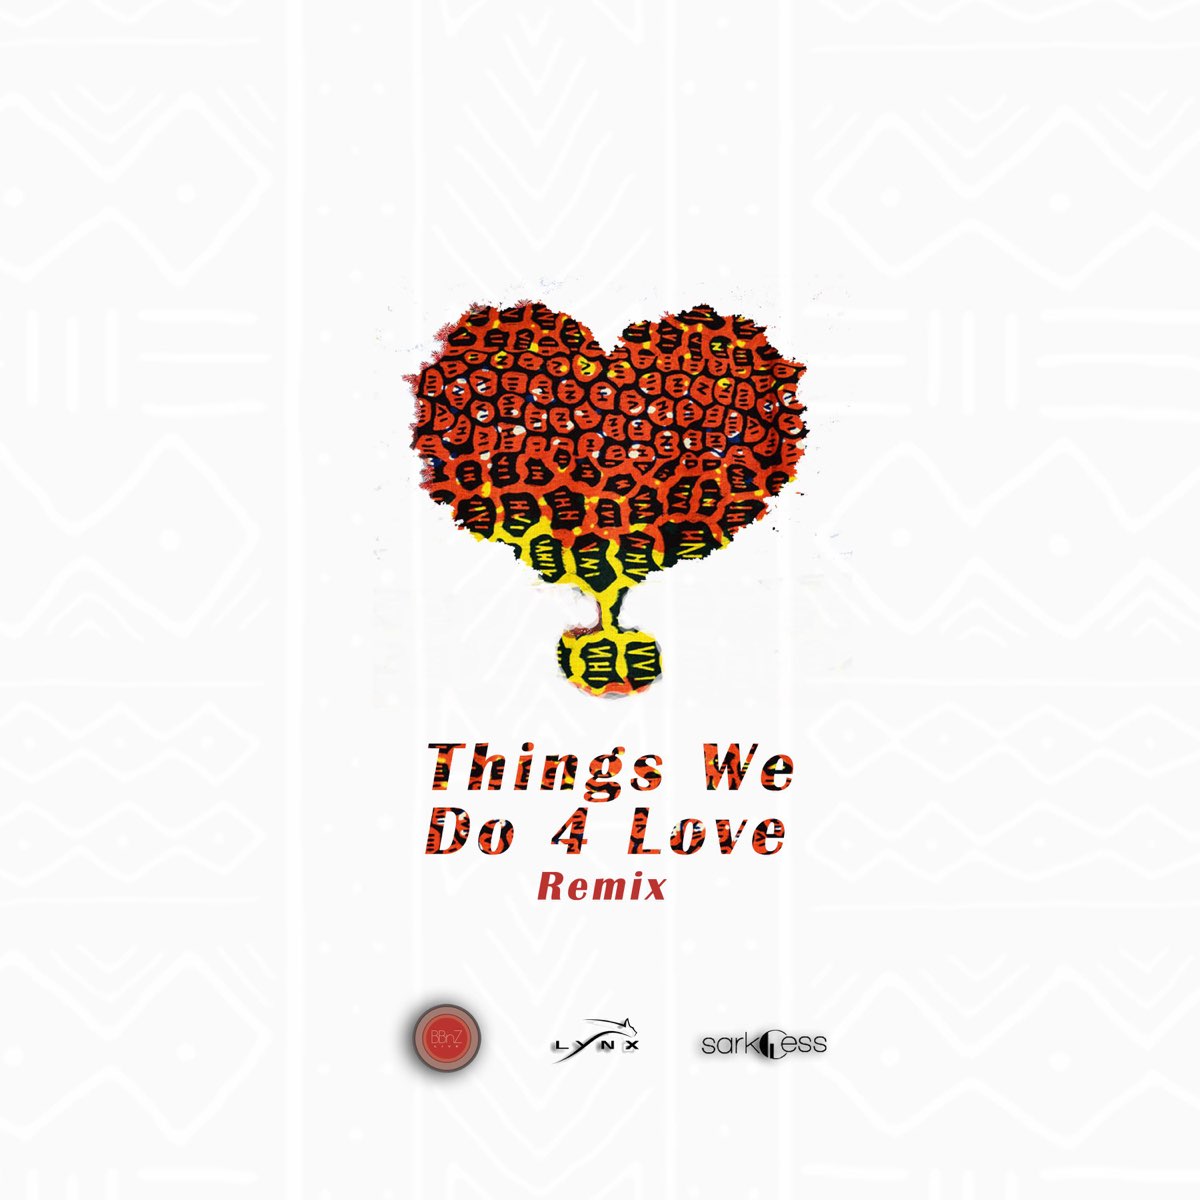 Little love remix. Love Remix. Jazzamor / things we do for Love обложка. Love things. The Sounds things we do for Love.